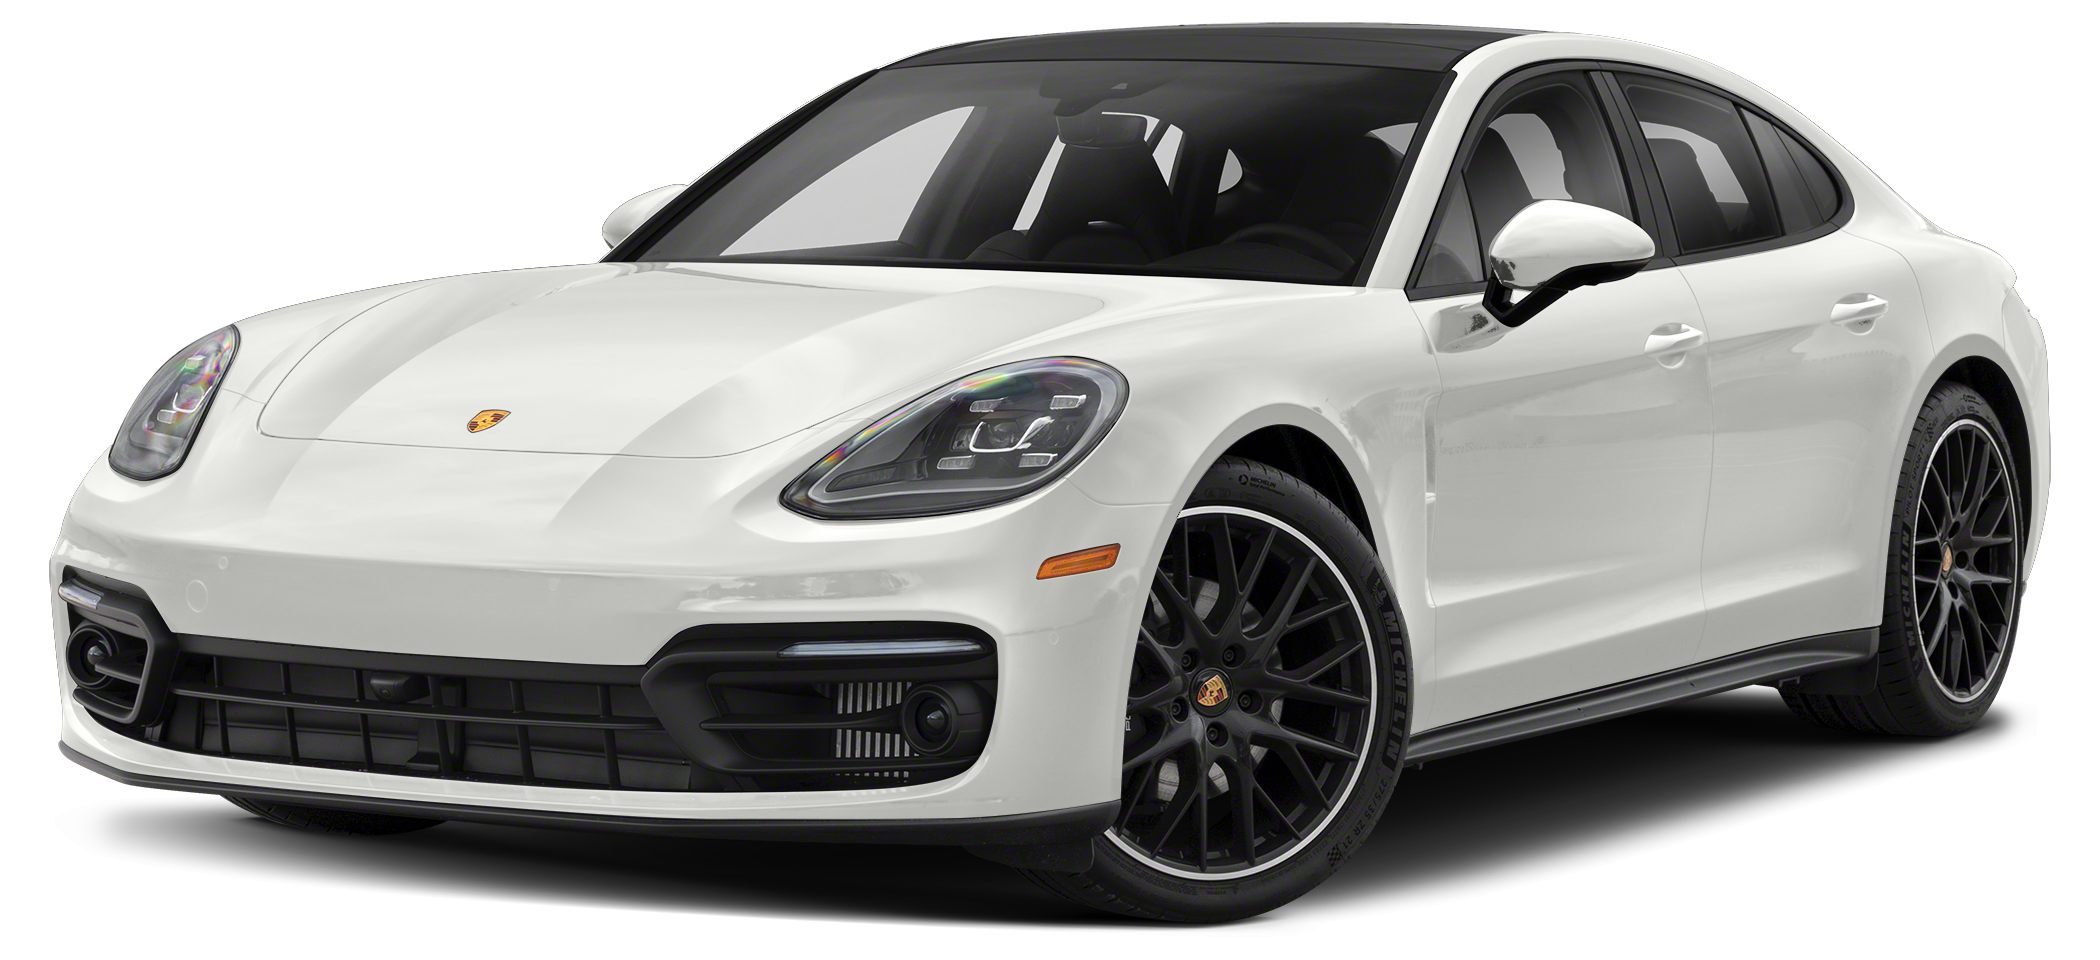 New and used 2022 Porsche Panamera 4S ...